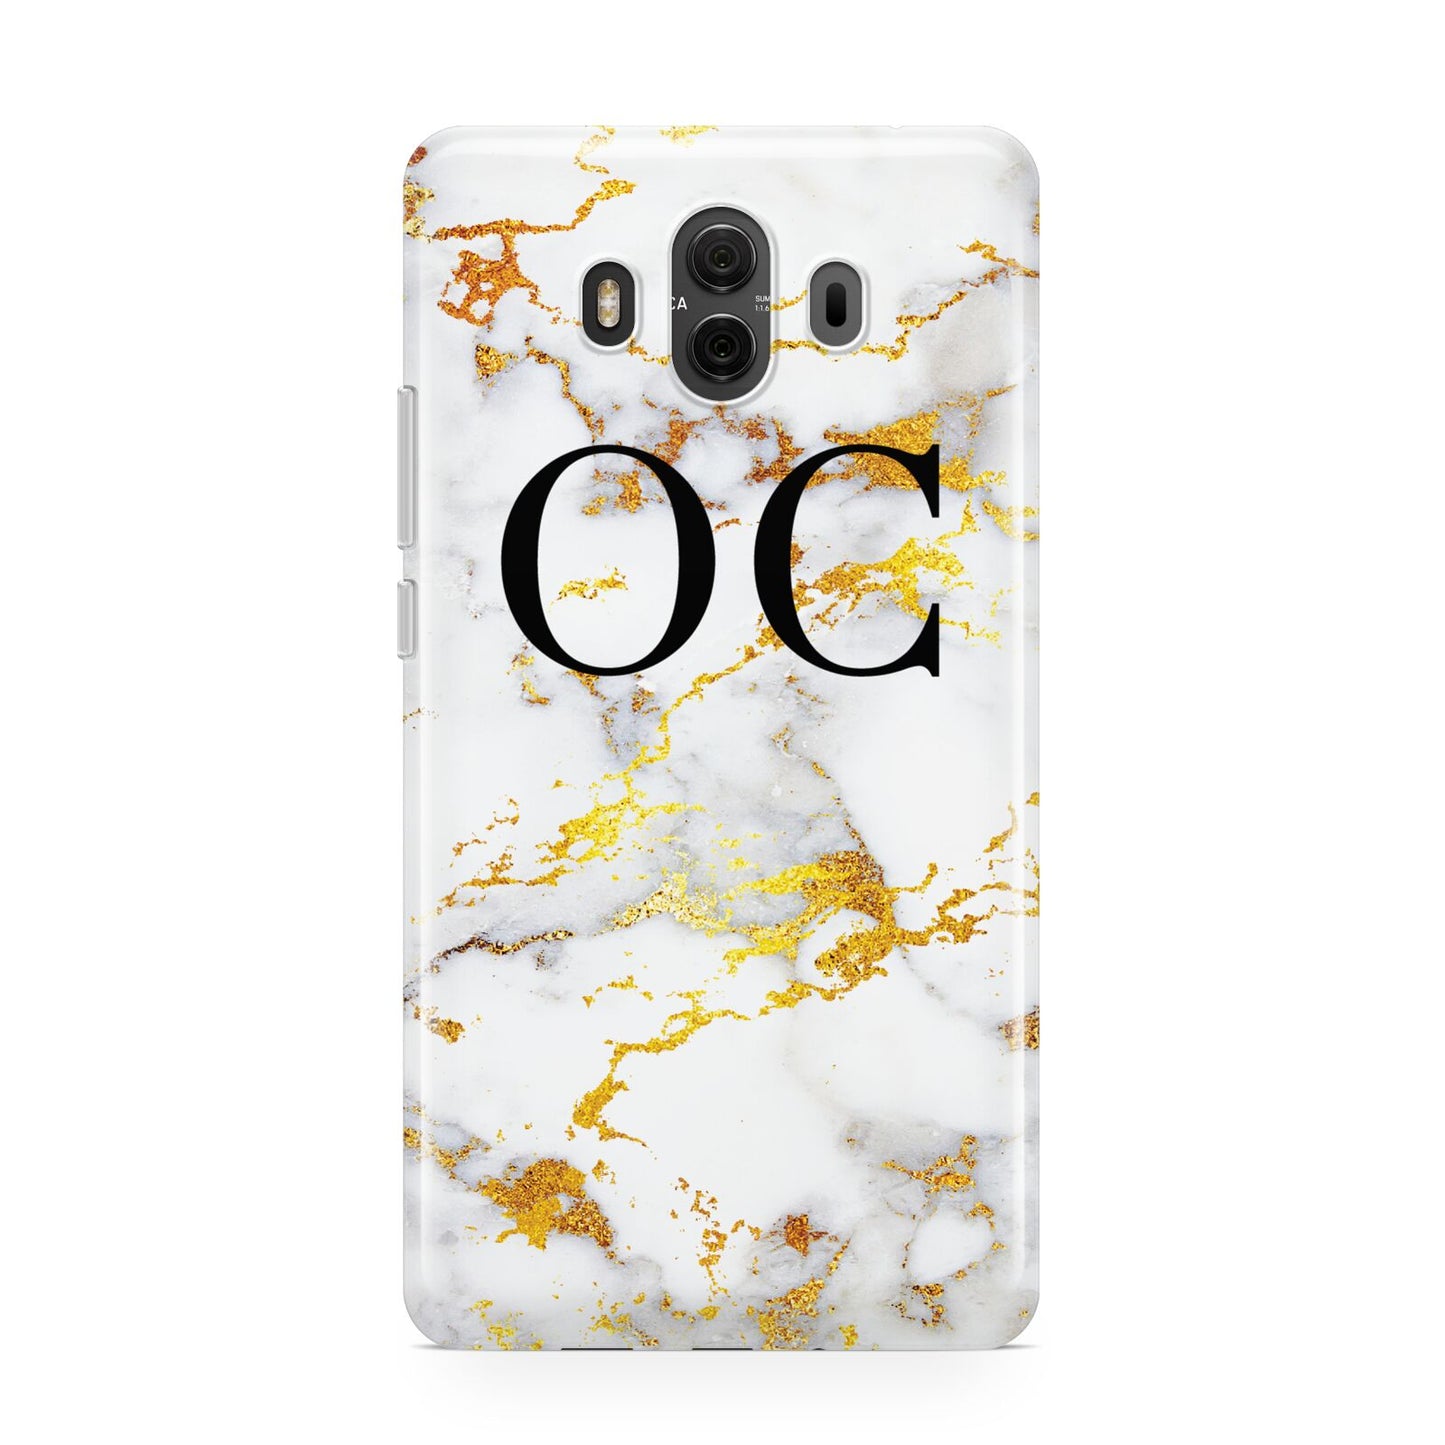 Personalised Gold Marble Initials Monogram Huawei Mate 10 Protective Phone Case